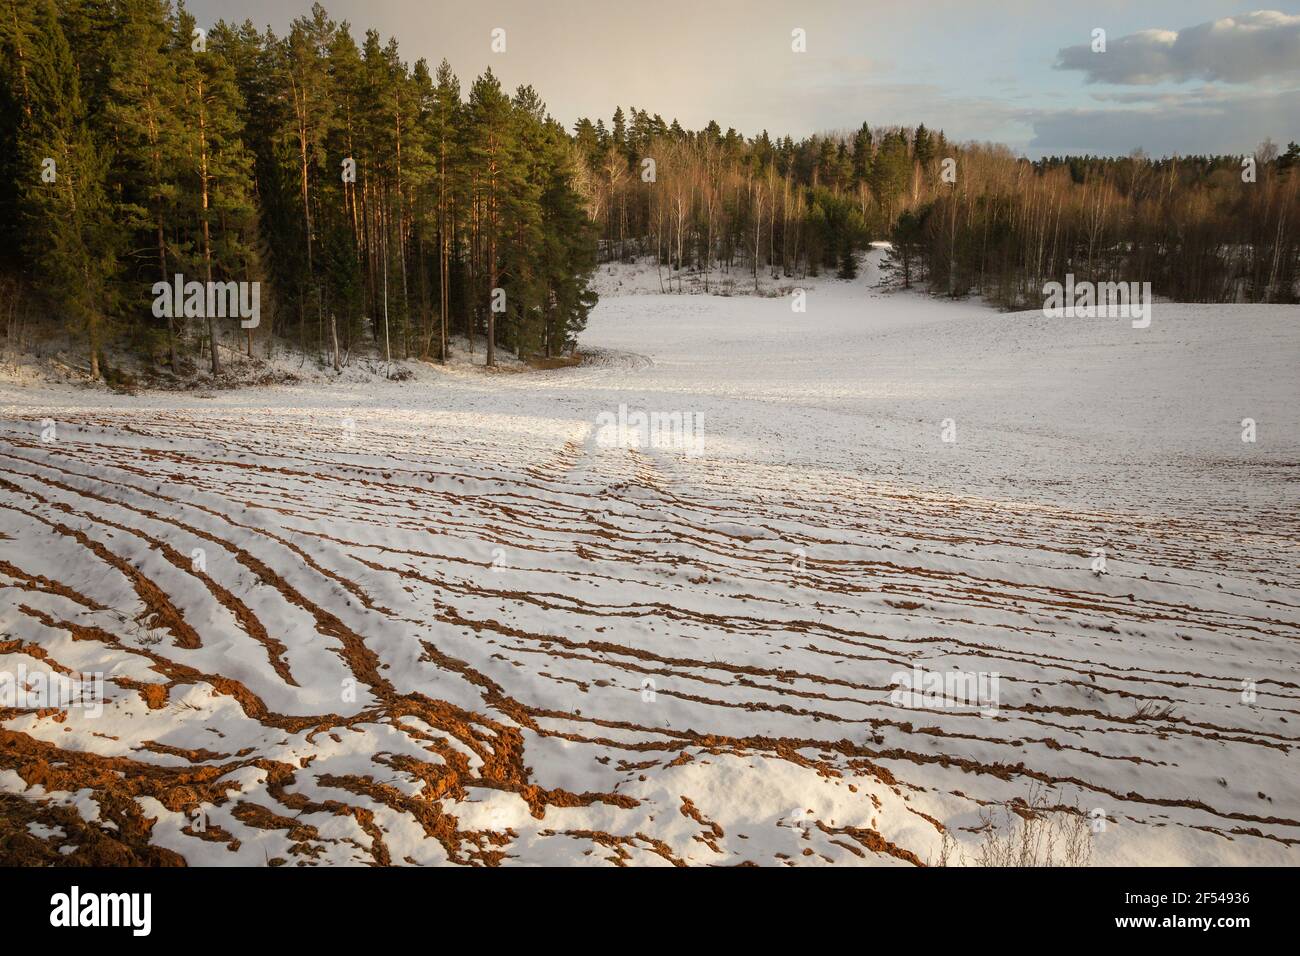 Snow covered plowed field, winter sunset Stock Photo